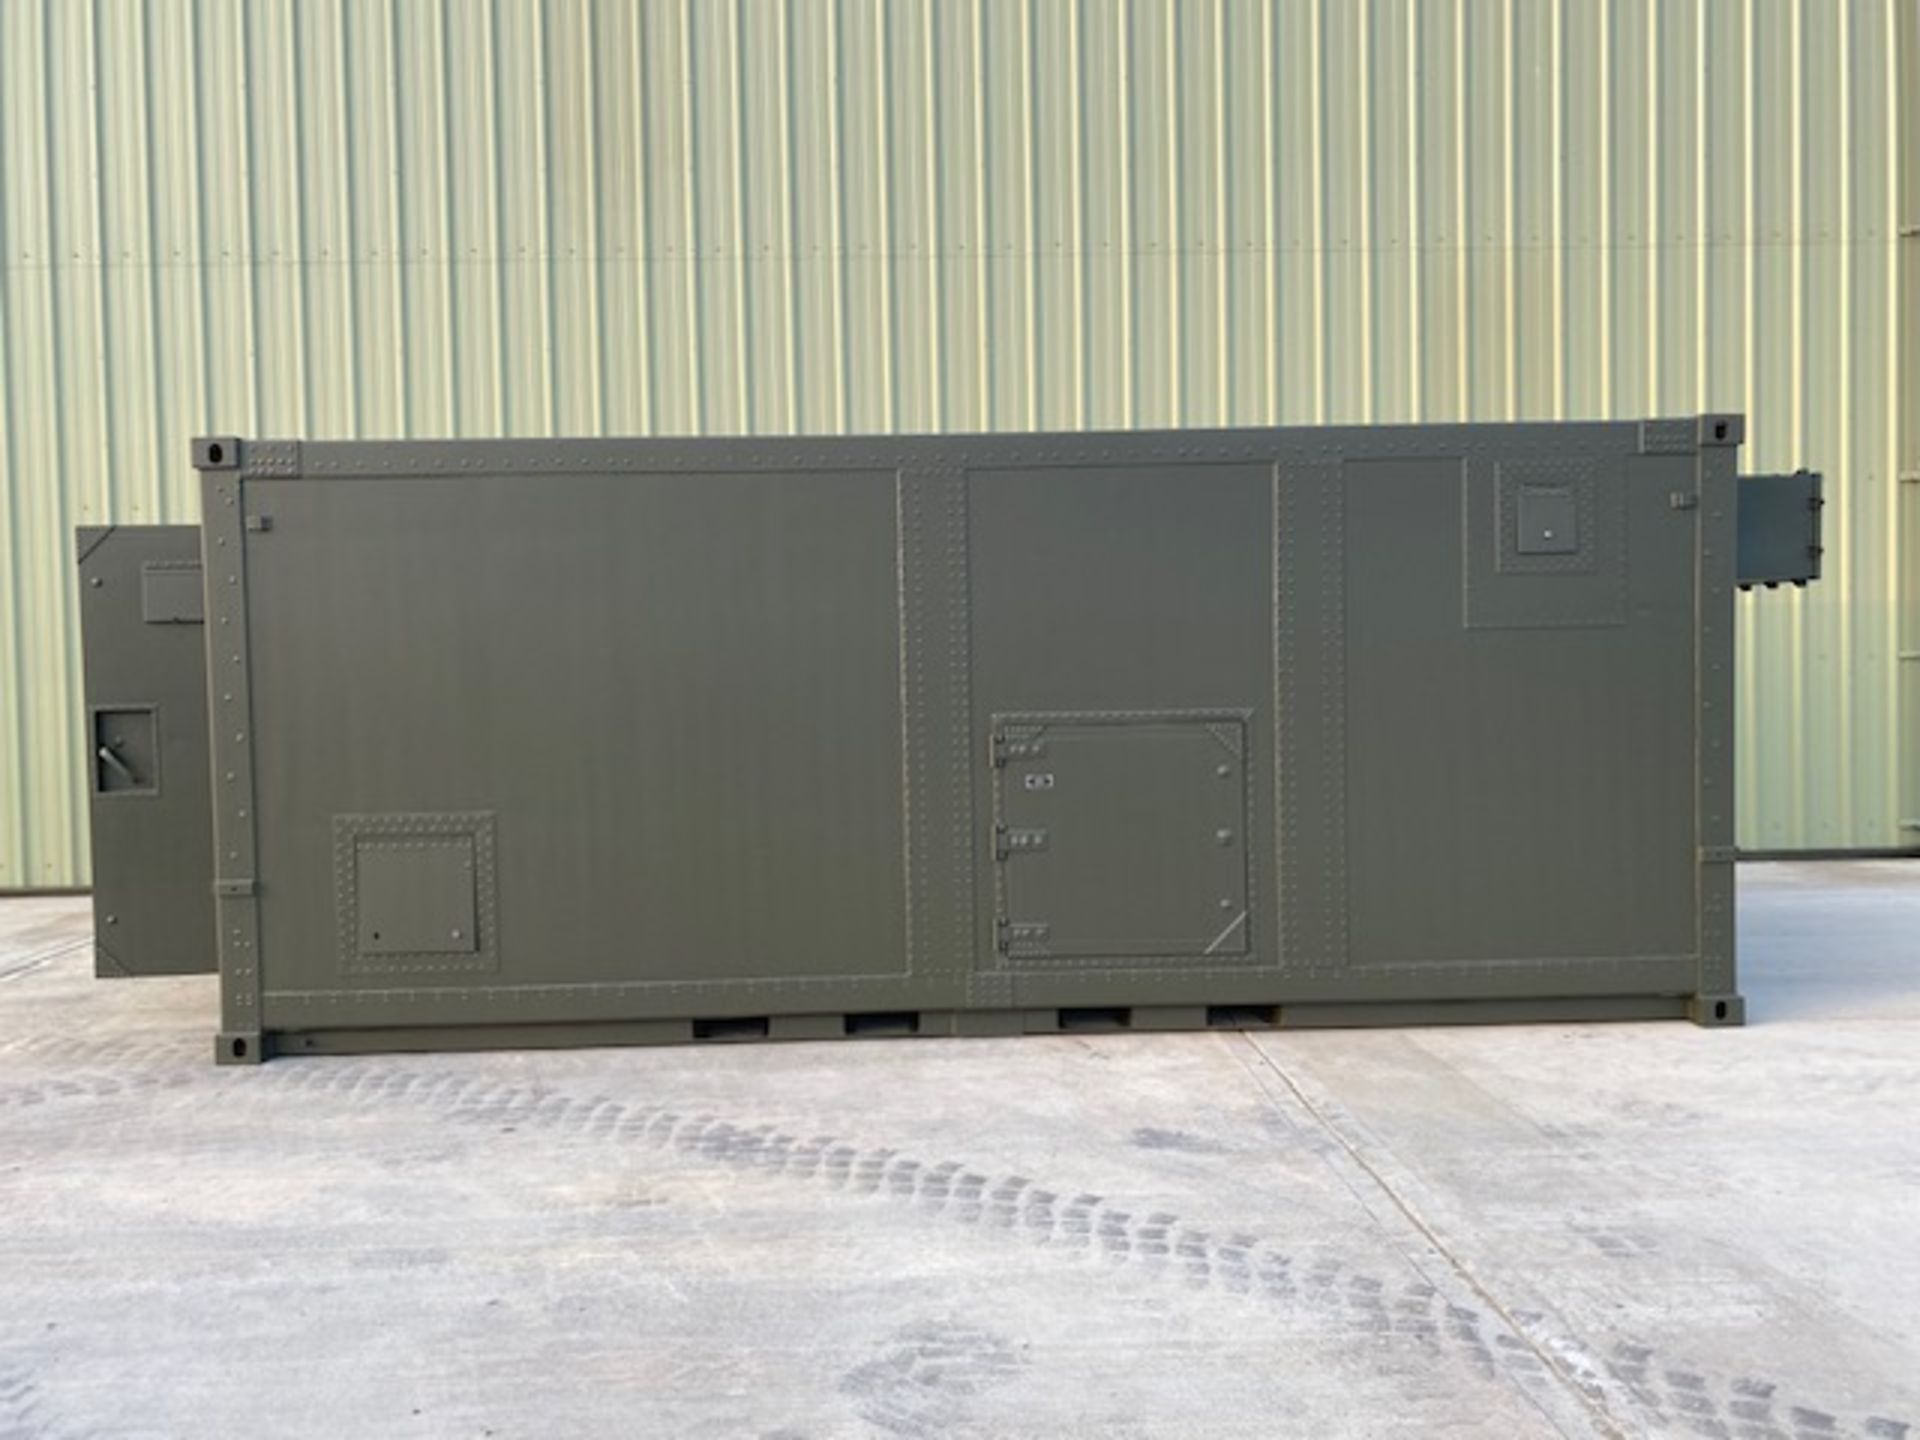 Transportable Lithium-ion Battery Storage & Charging Container From the UK Ministry of Defence - Bild 16 aus 65